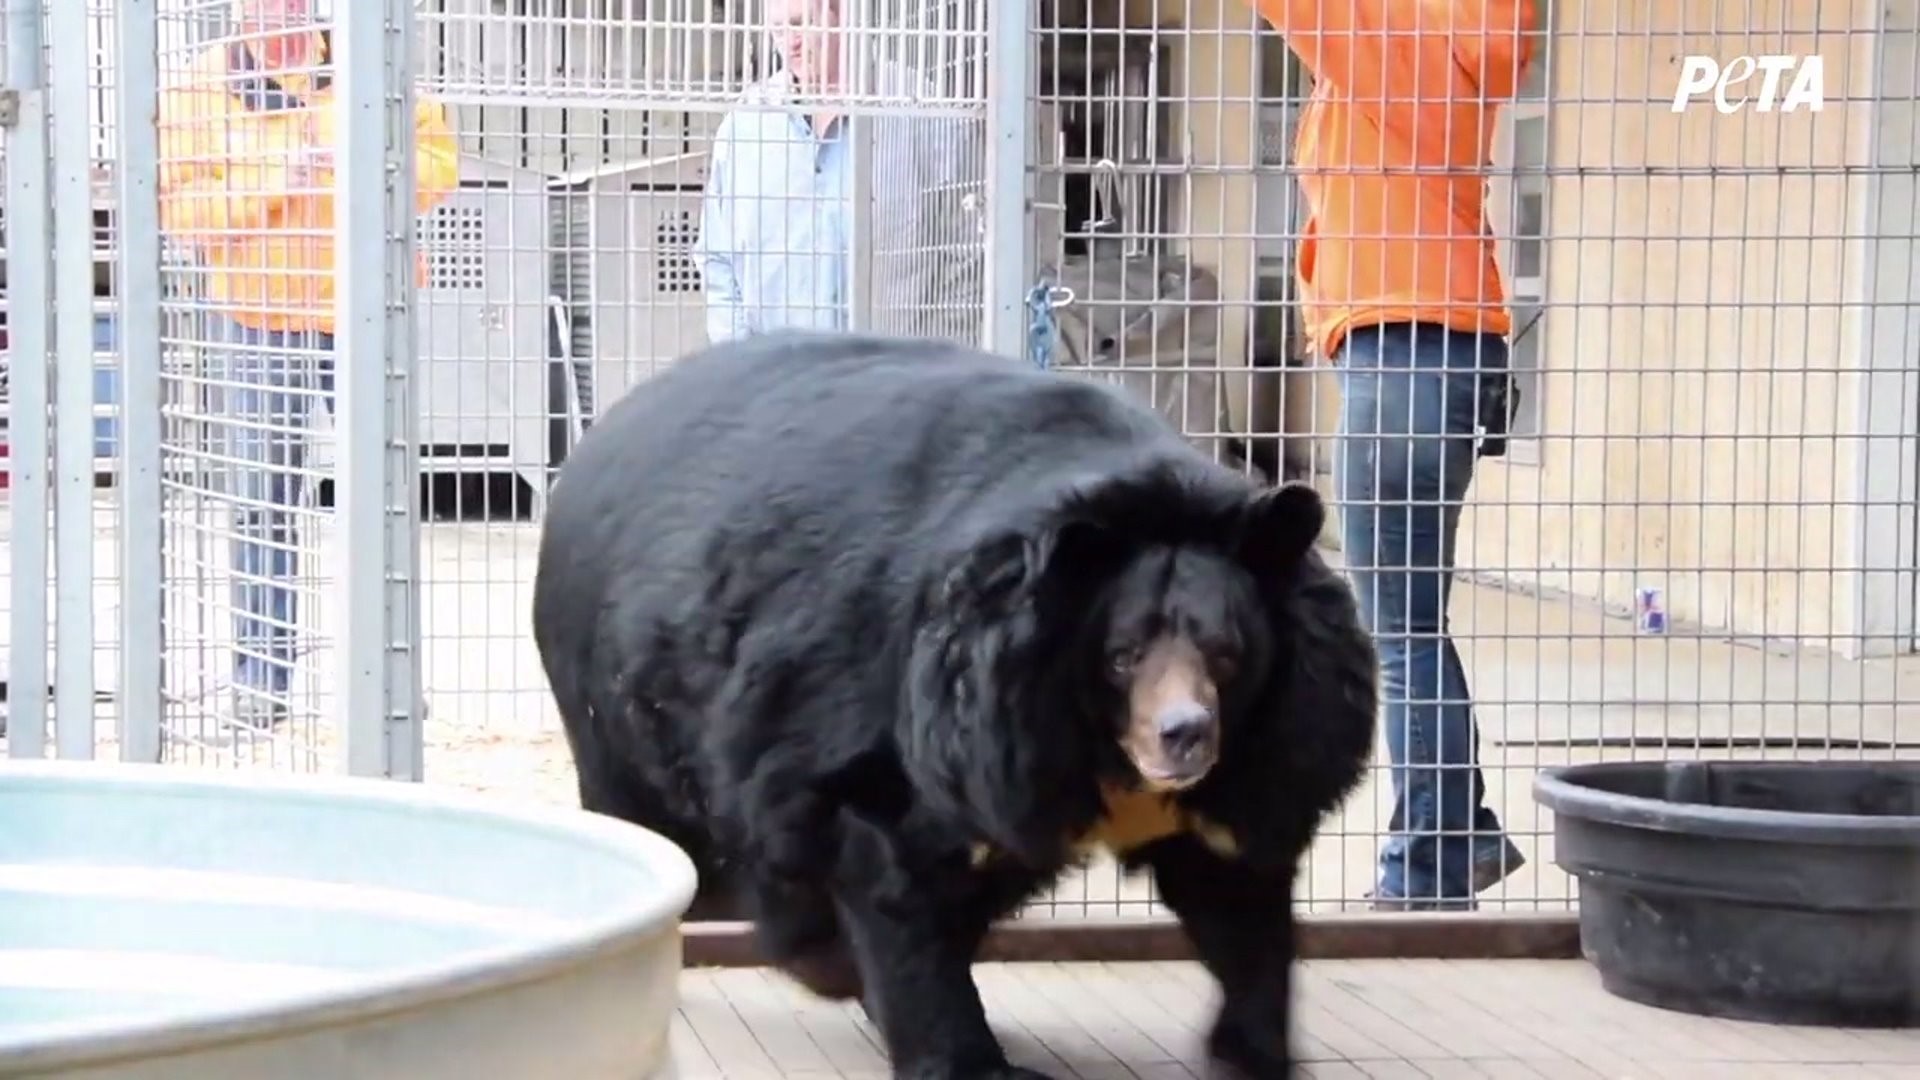 Dillan the Bear Arrives at New Home in Colorado